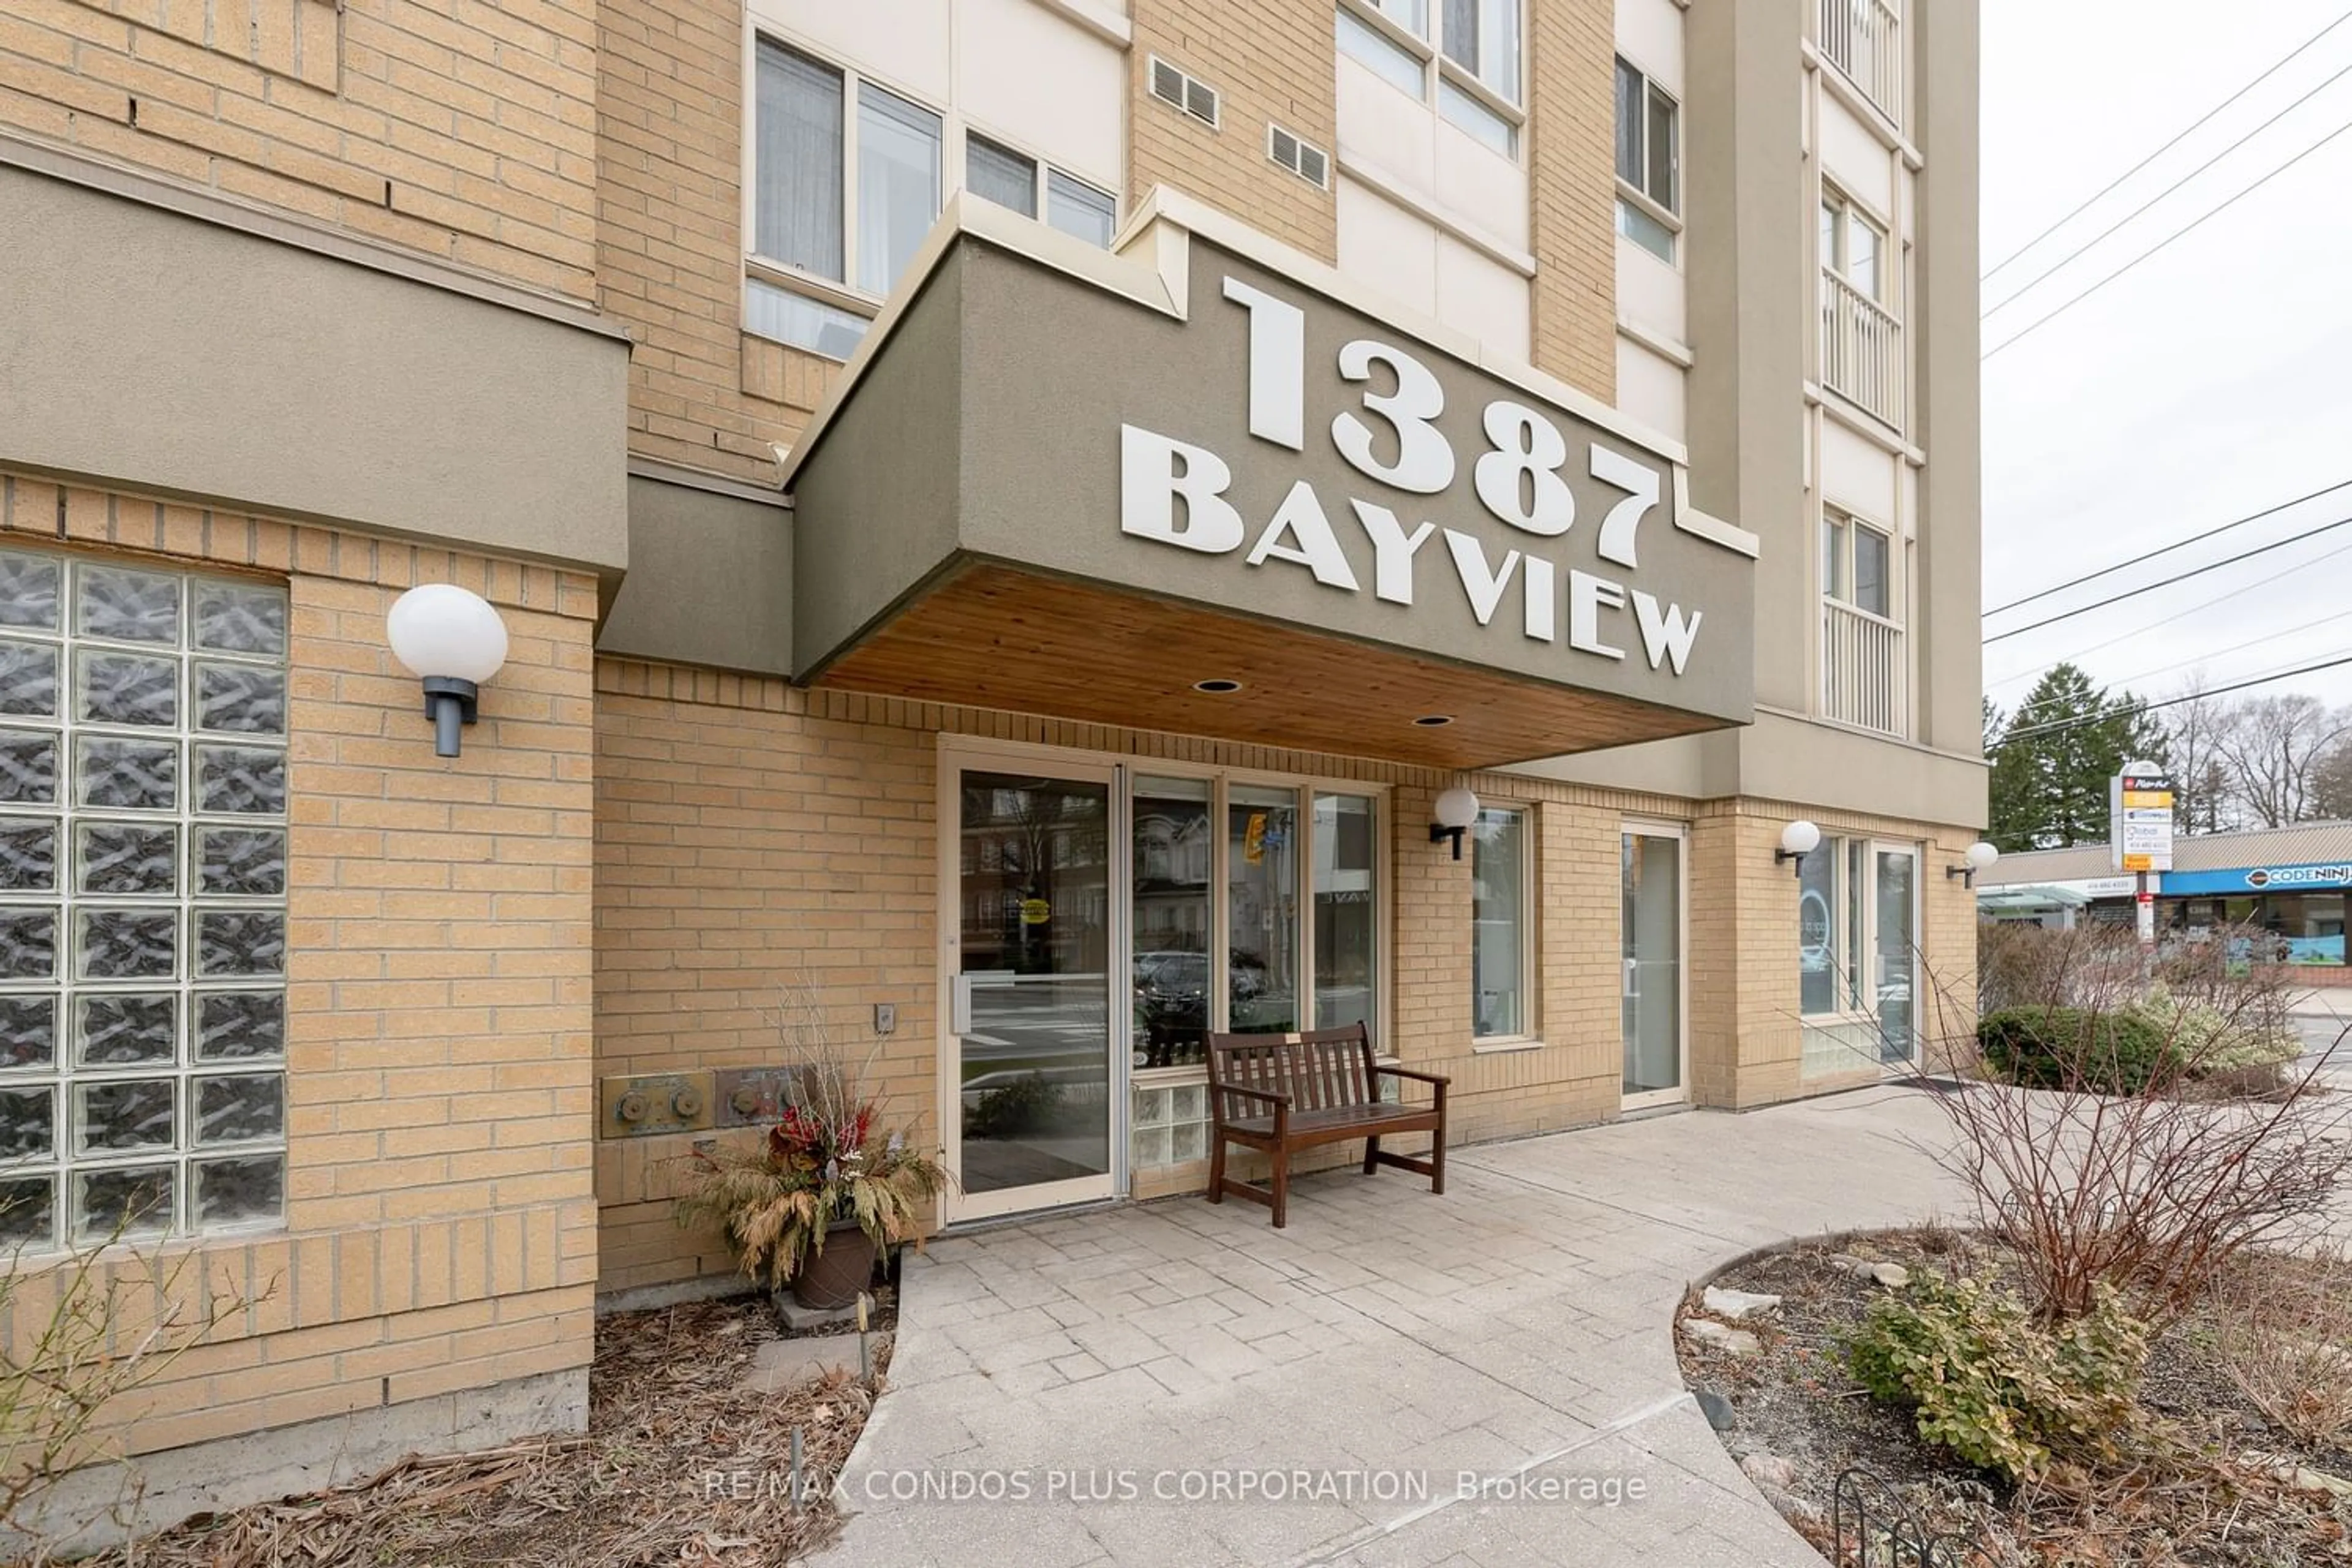 Indoor foyer for 1387 Bayview Ave #402, Toronto Ontario M4G 3A5